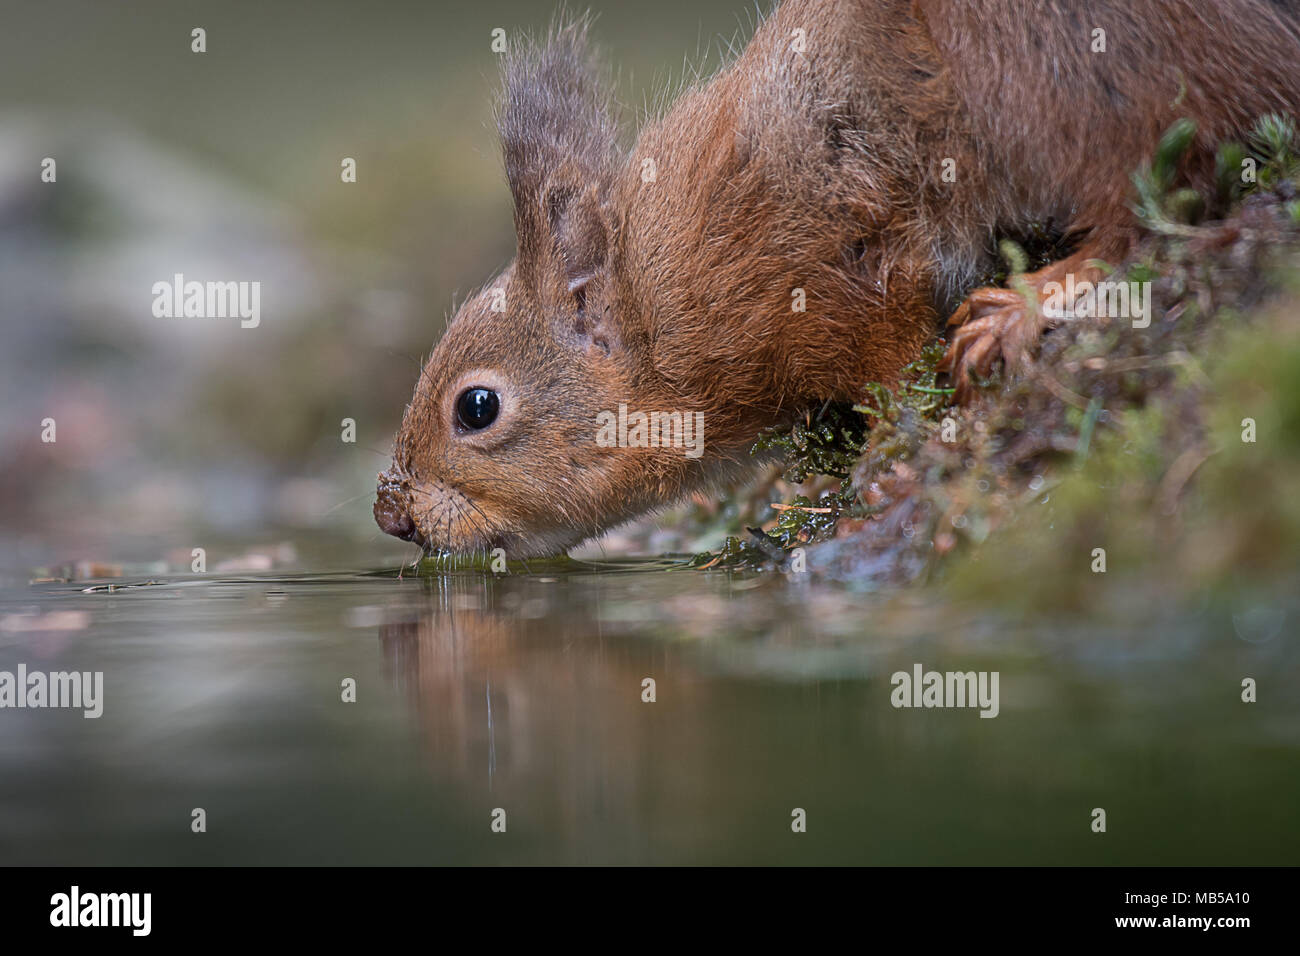 A very close up image from a low level of a red squirrel drinking from a pool with a slight reflection in the water Stock Photo